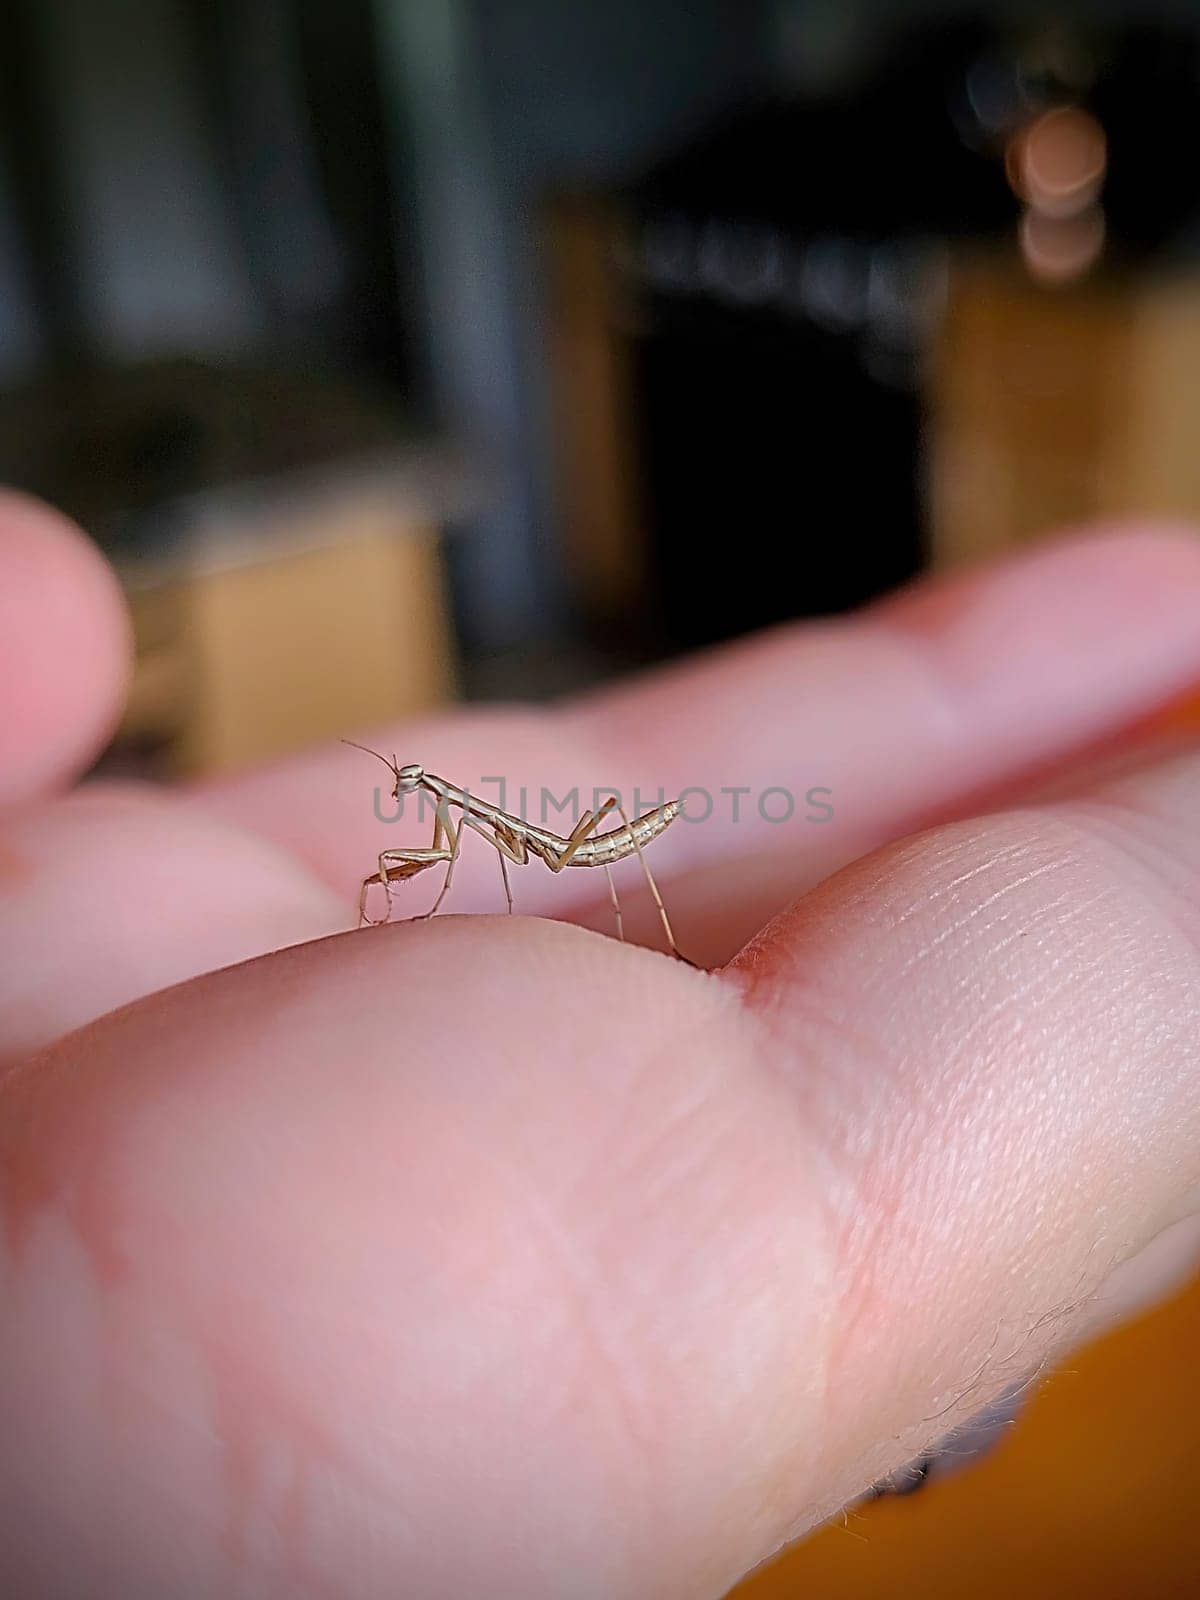 Close-up of human gently interacting with a curious praying mantis in soft indoor lighting in Fort Wayne, Indiana, 2022, highlighting coexistence and nature's intricate beauty.